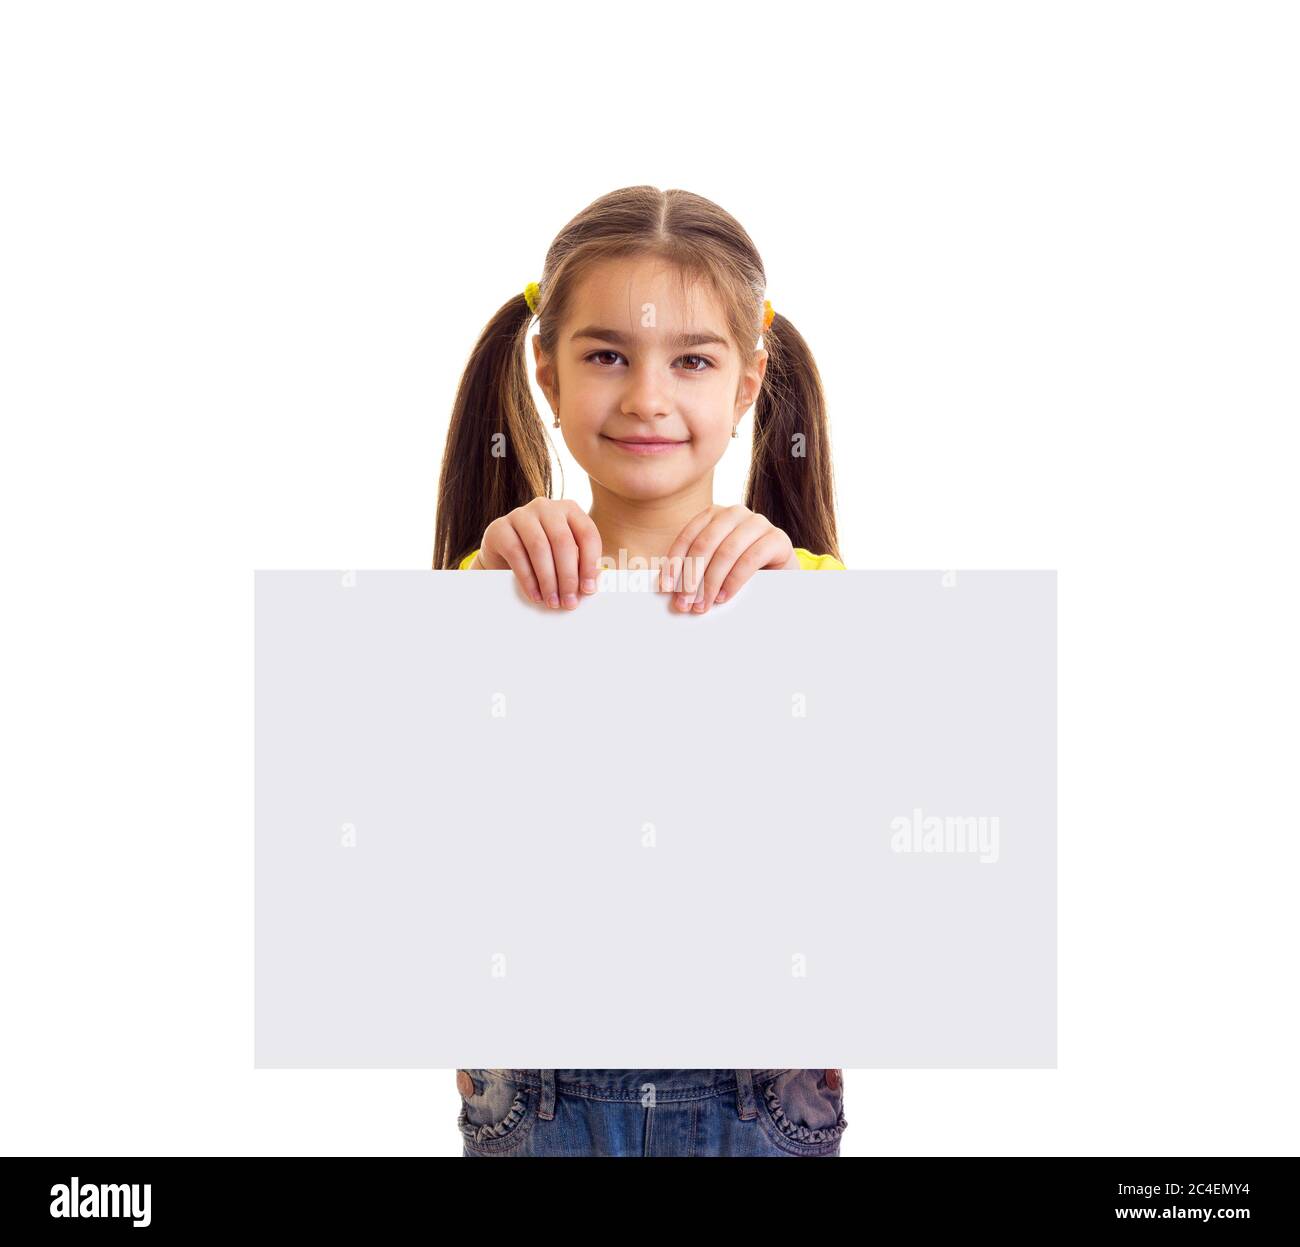 Little smiling girl looking in camera and holding white paper banner Stock Photo